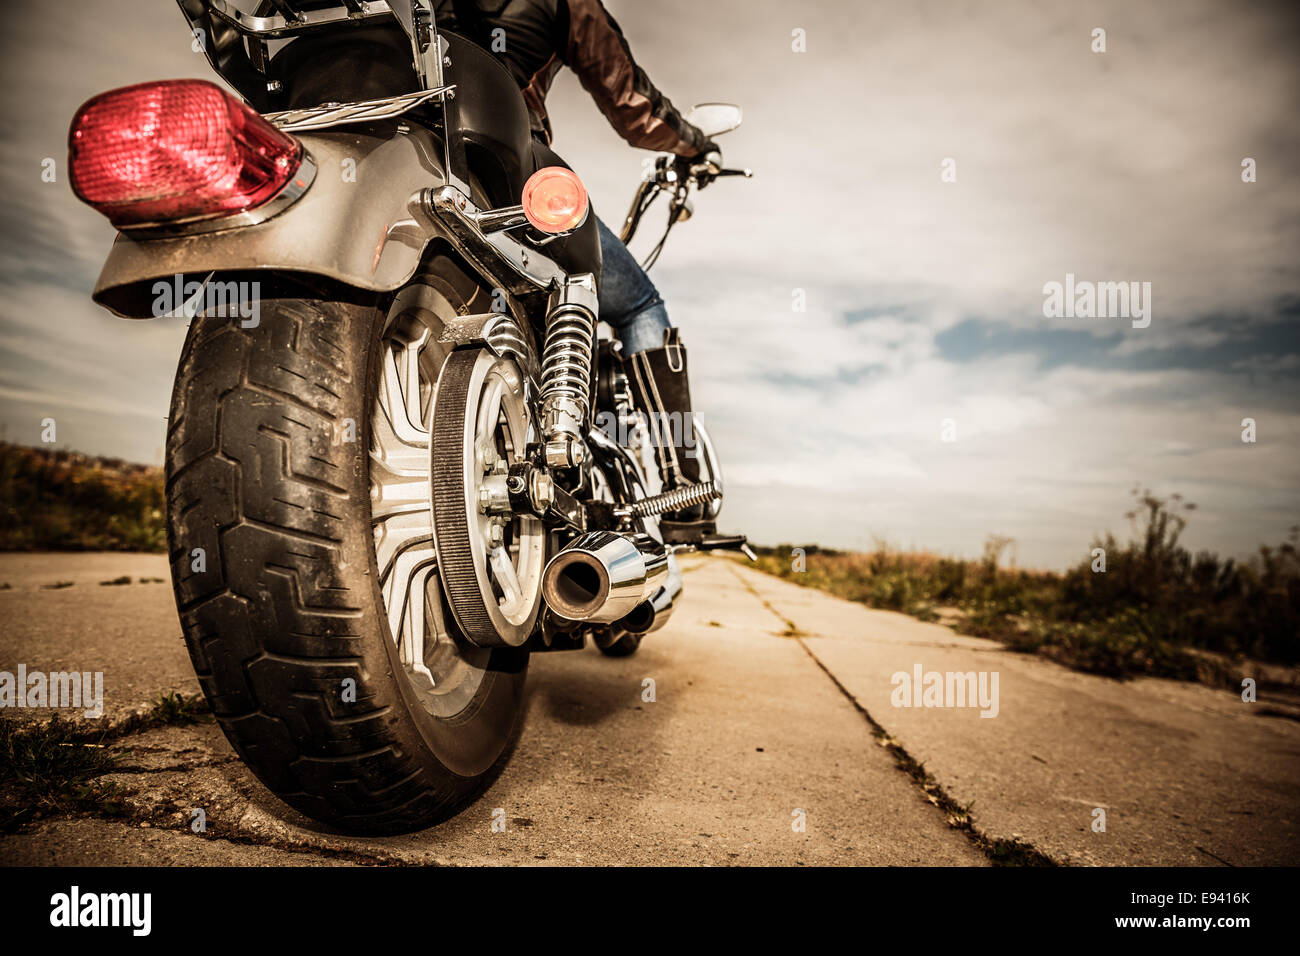 Biker girl riding on a motorcycle. Bottom view of the legs in leather boots. Focus on the rear wheel. Stock Photo